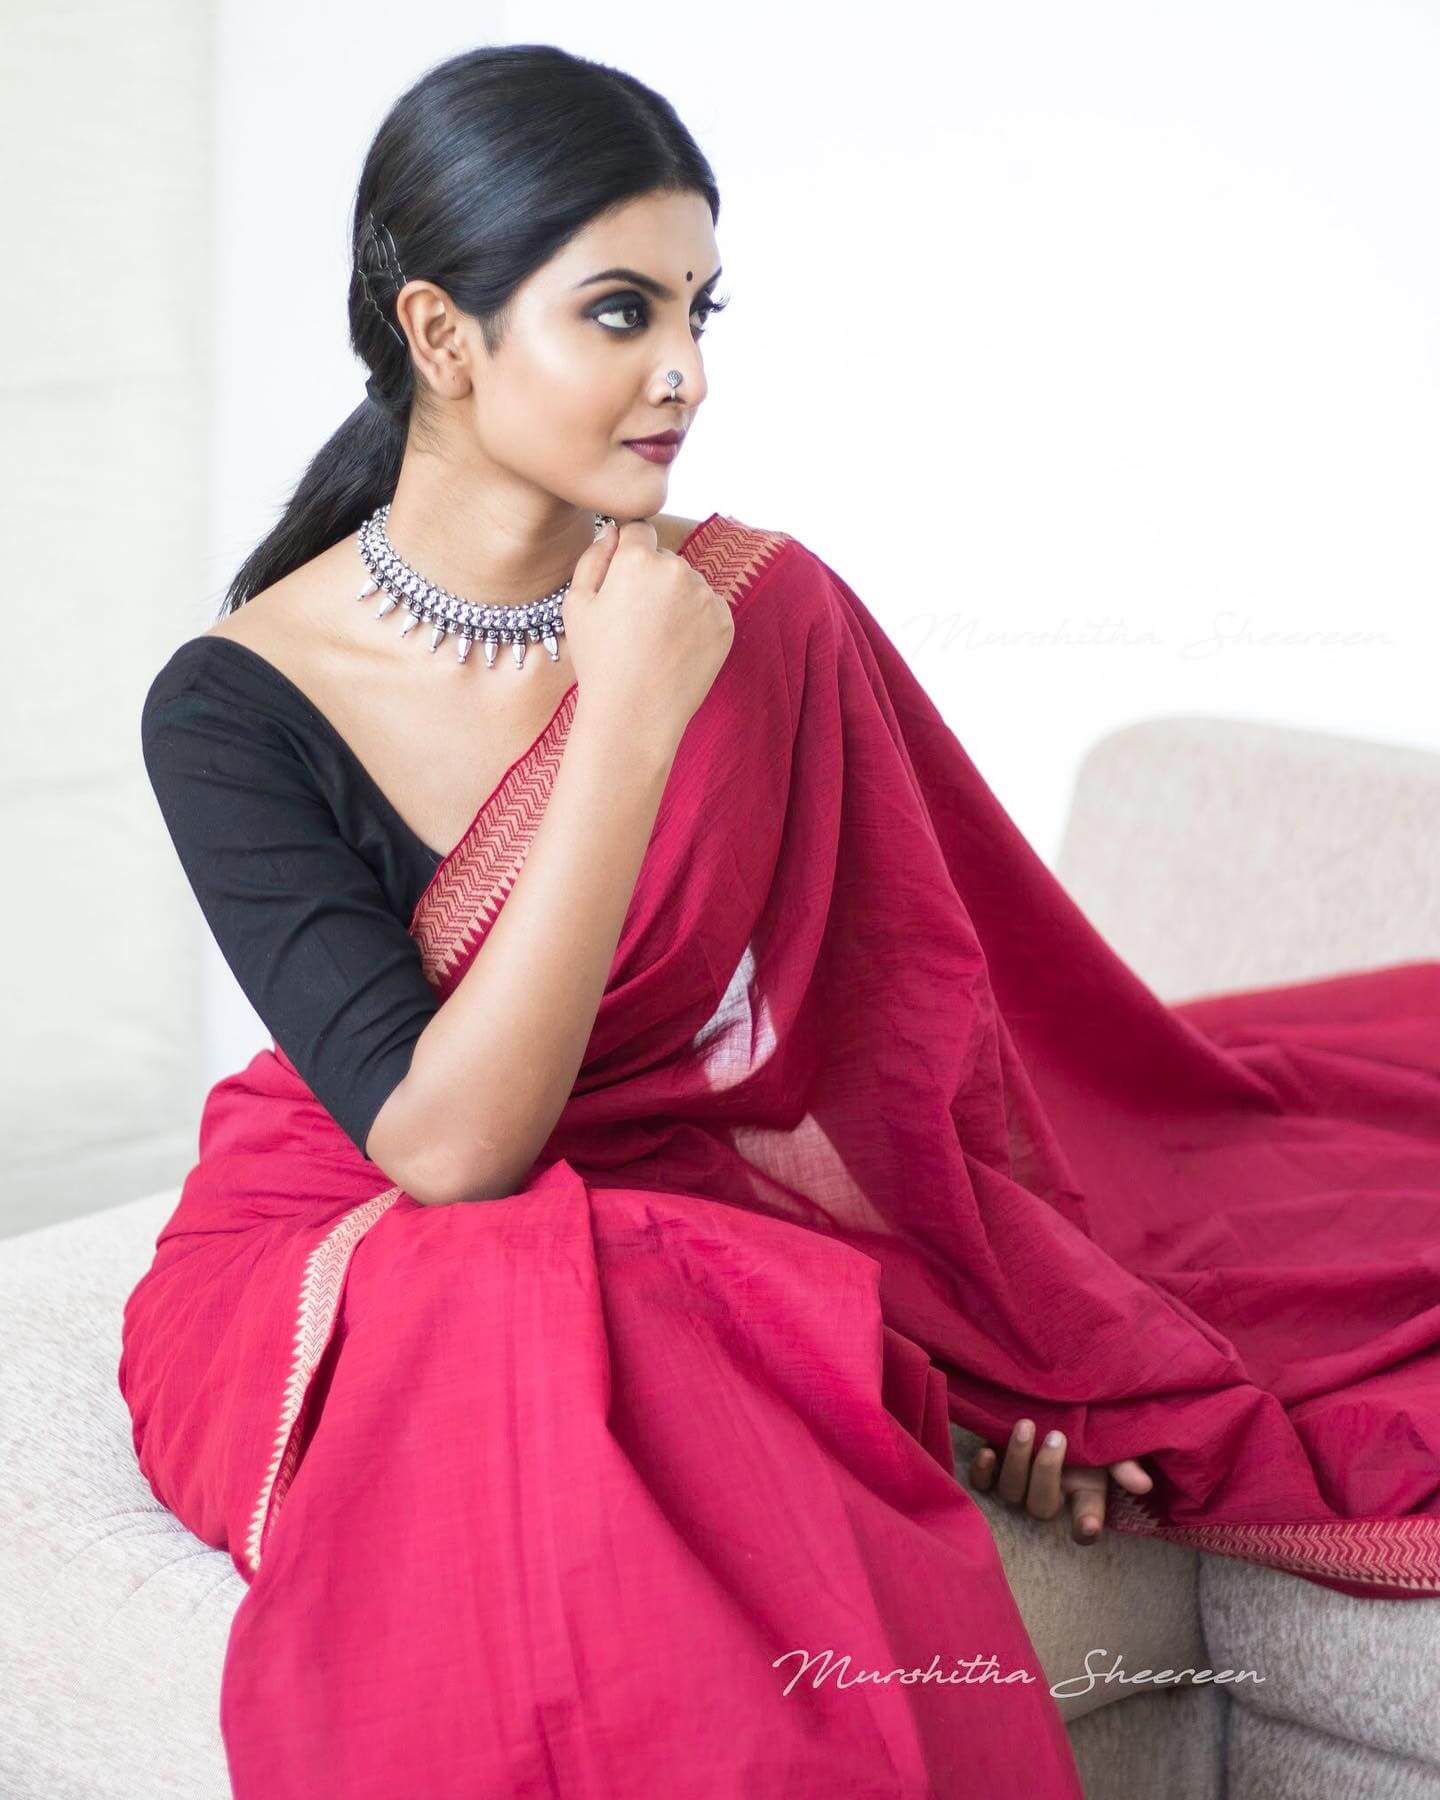 Nivedhithaa Sathish  In Red Cotton Saree With Black Blouse With Sleek Hair